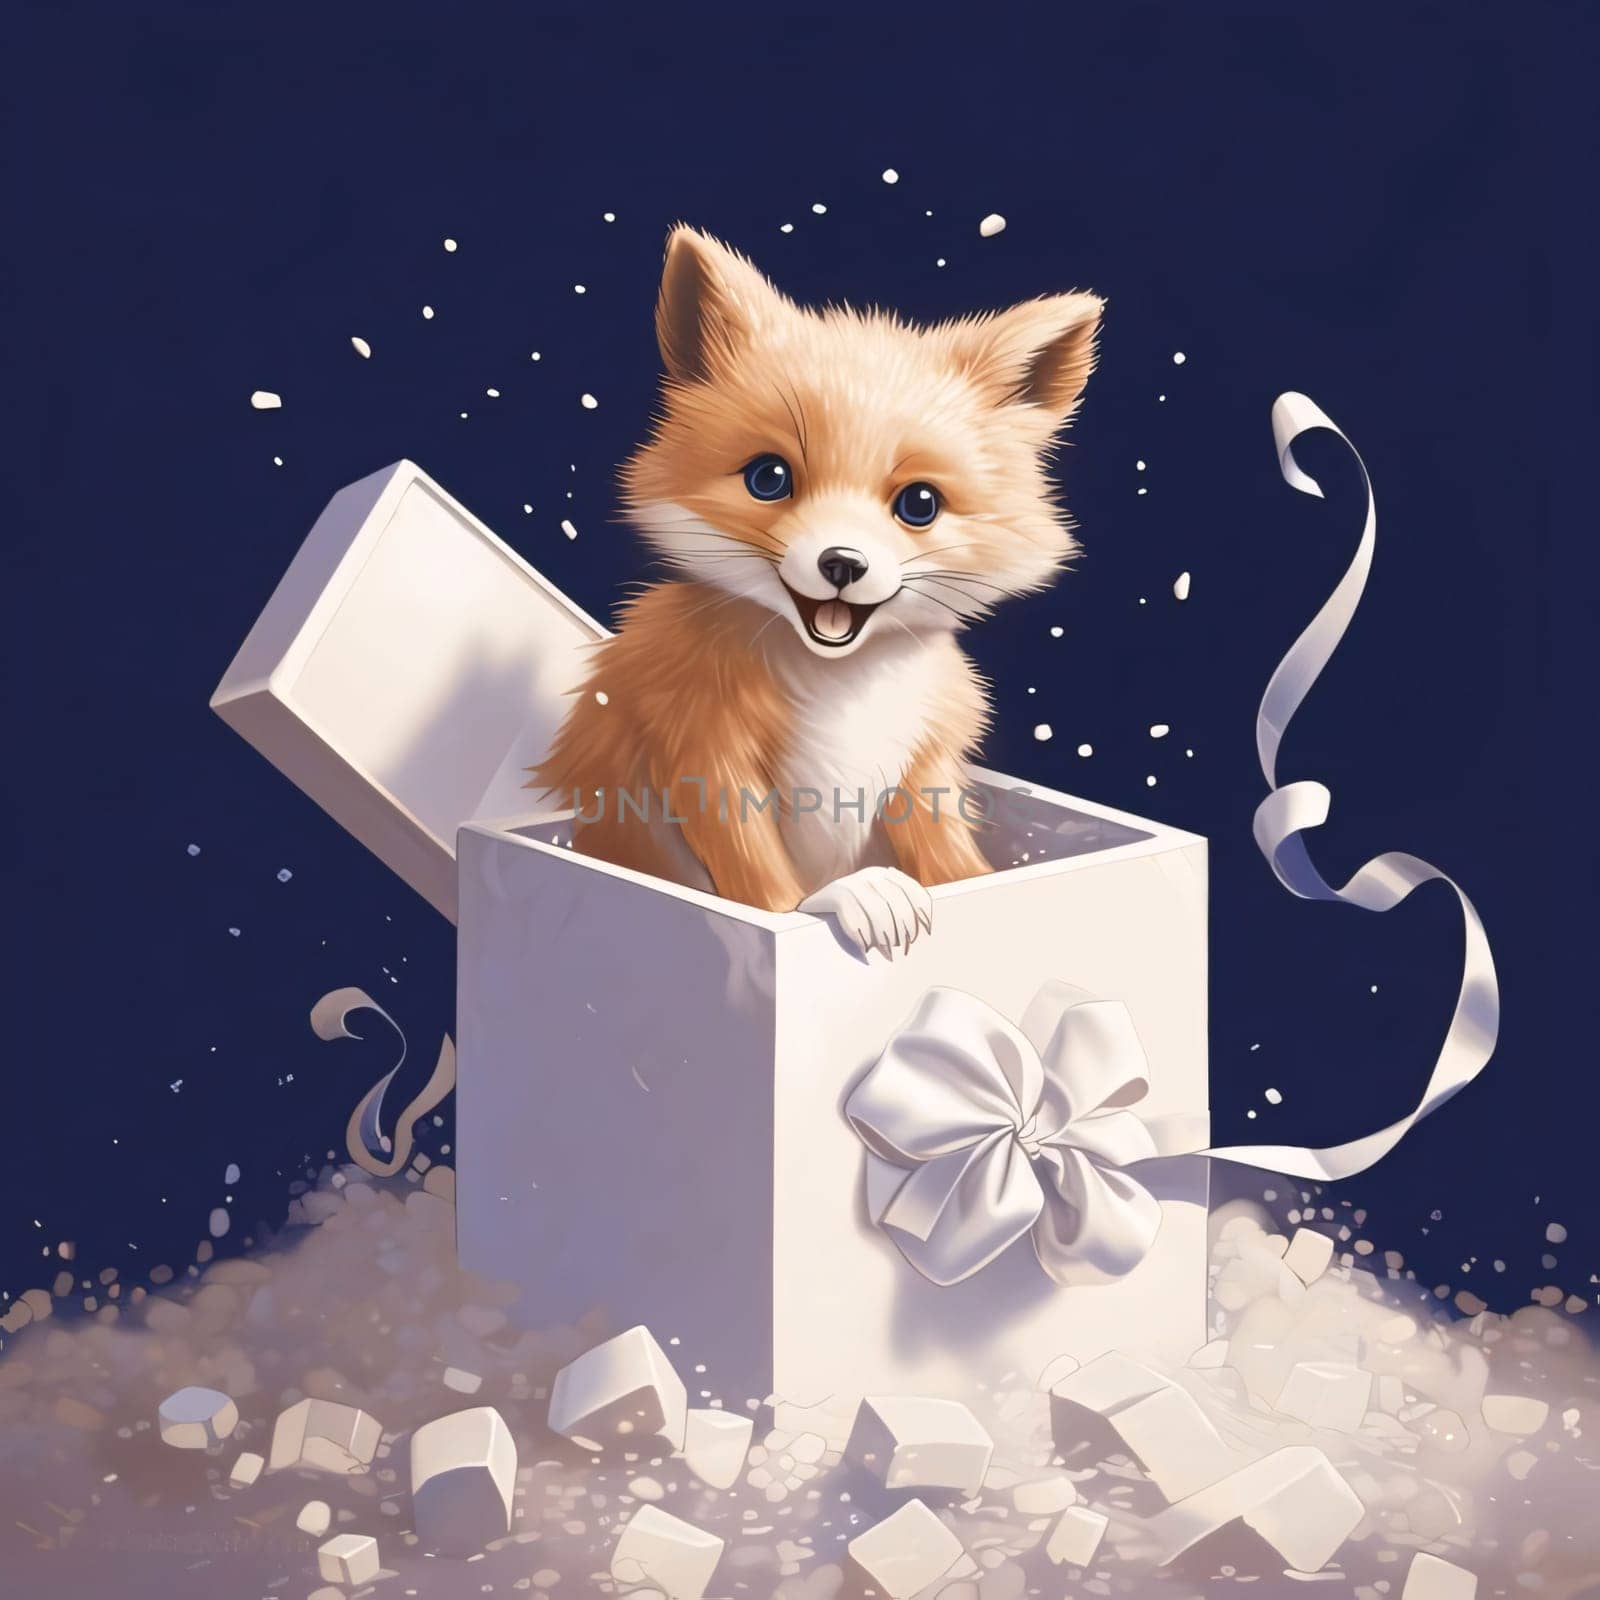 Illustration of a small fox in a white box with a bow, navy blue background. Gifts as a day symbol of present and love. A time of falling in love and love.